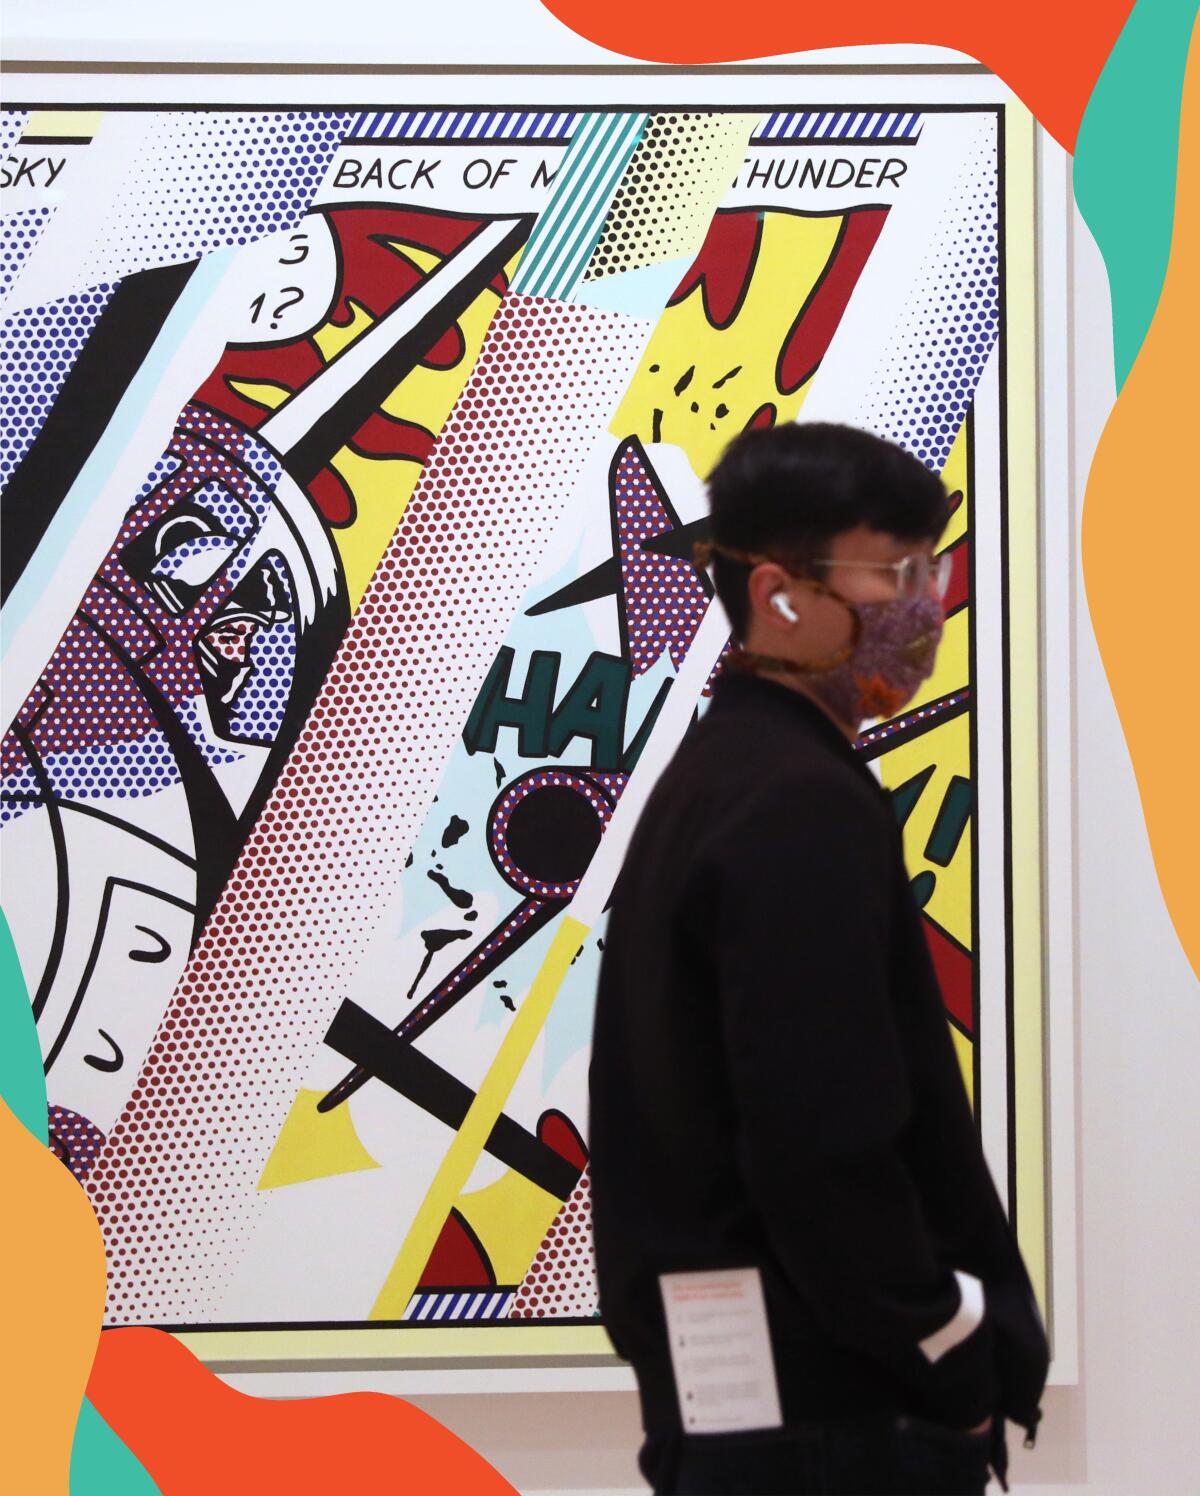 A masked person stands by the Roy Lichtenstein painting "Reflections: Whaam!" at the San Francisco Museum of Modern Art